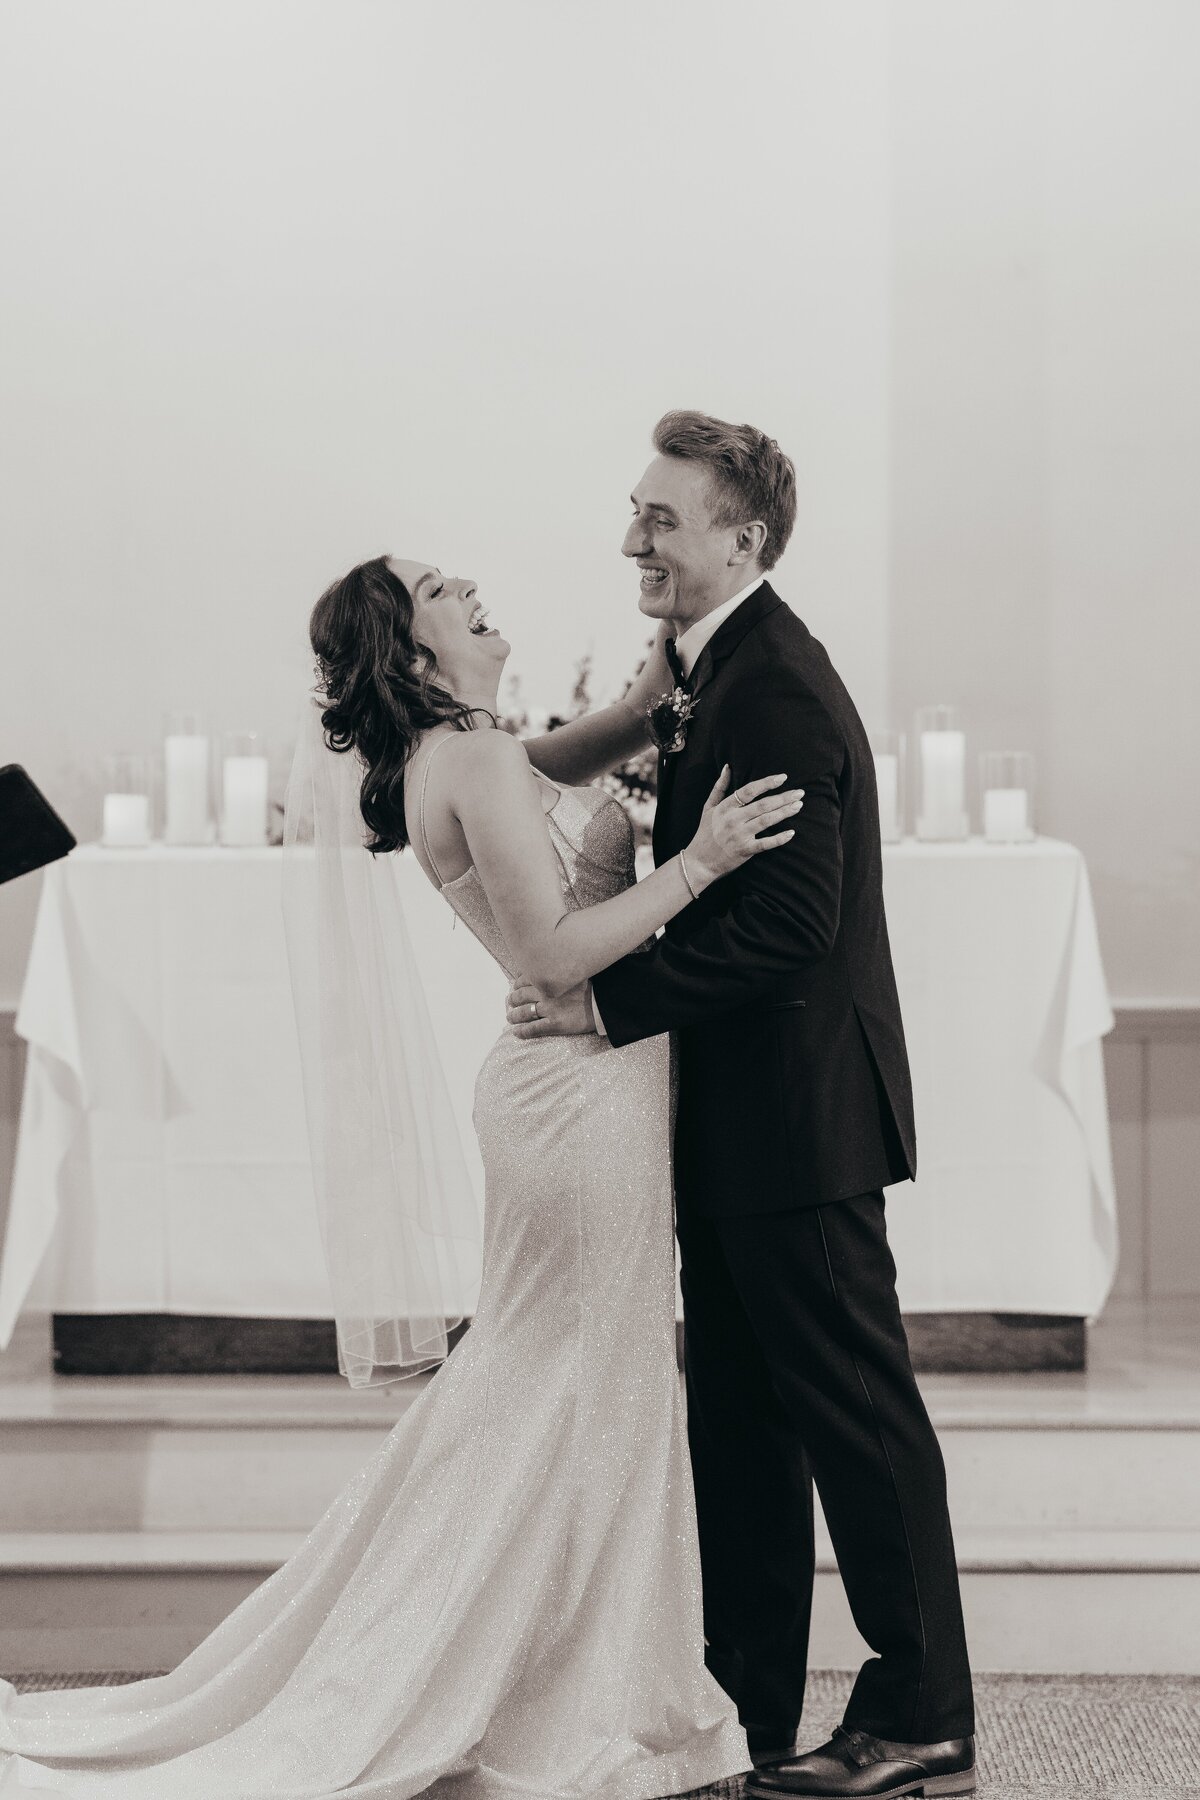 A joyful bride in a sparkling gown and a groom in a black suit dancing at their Iowa wedding reception, surrounded by candles and a draped table.